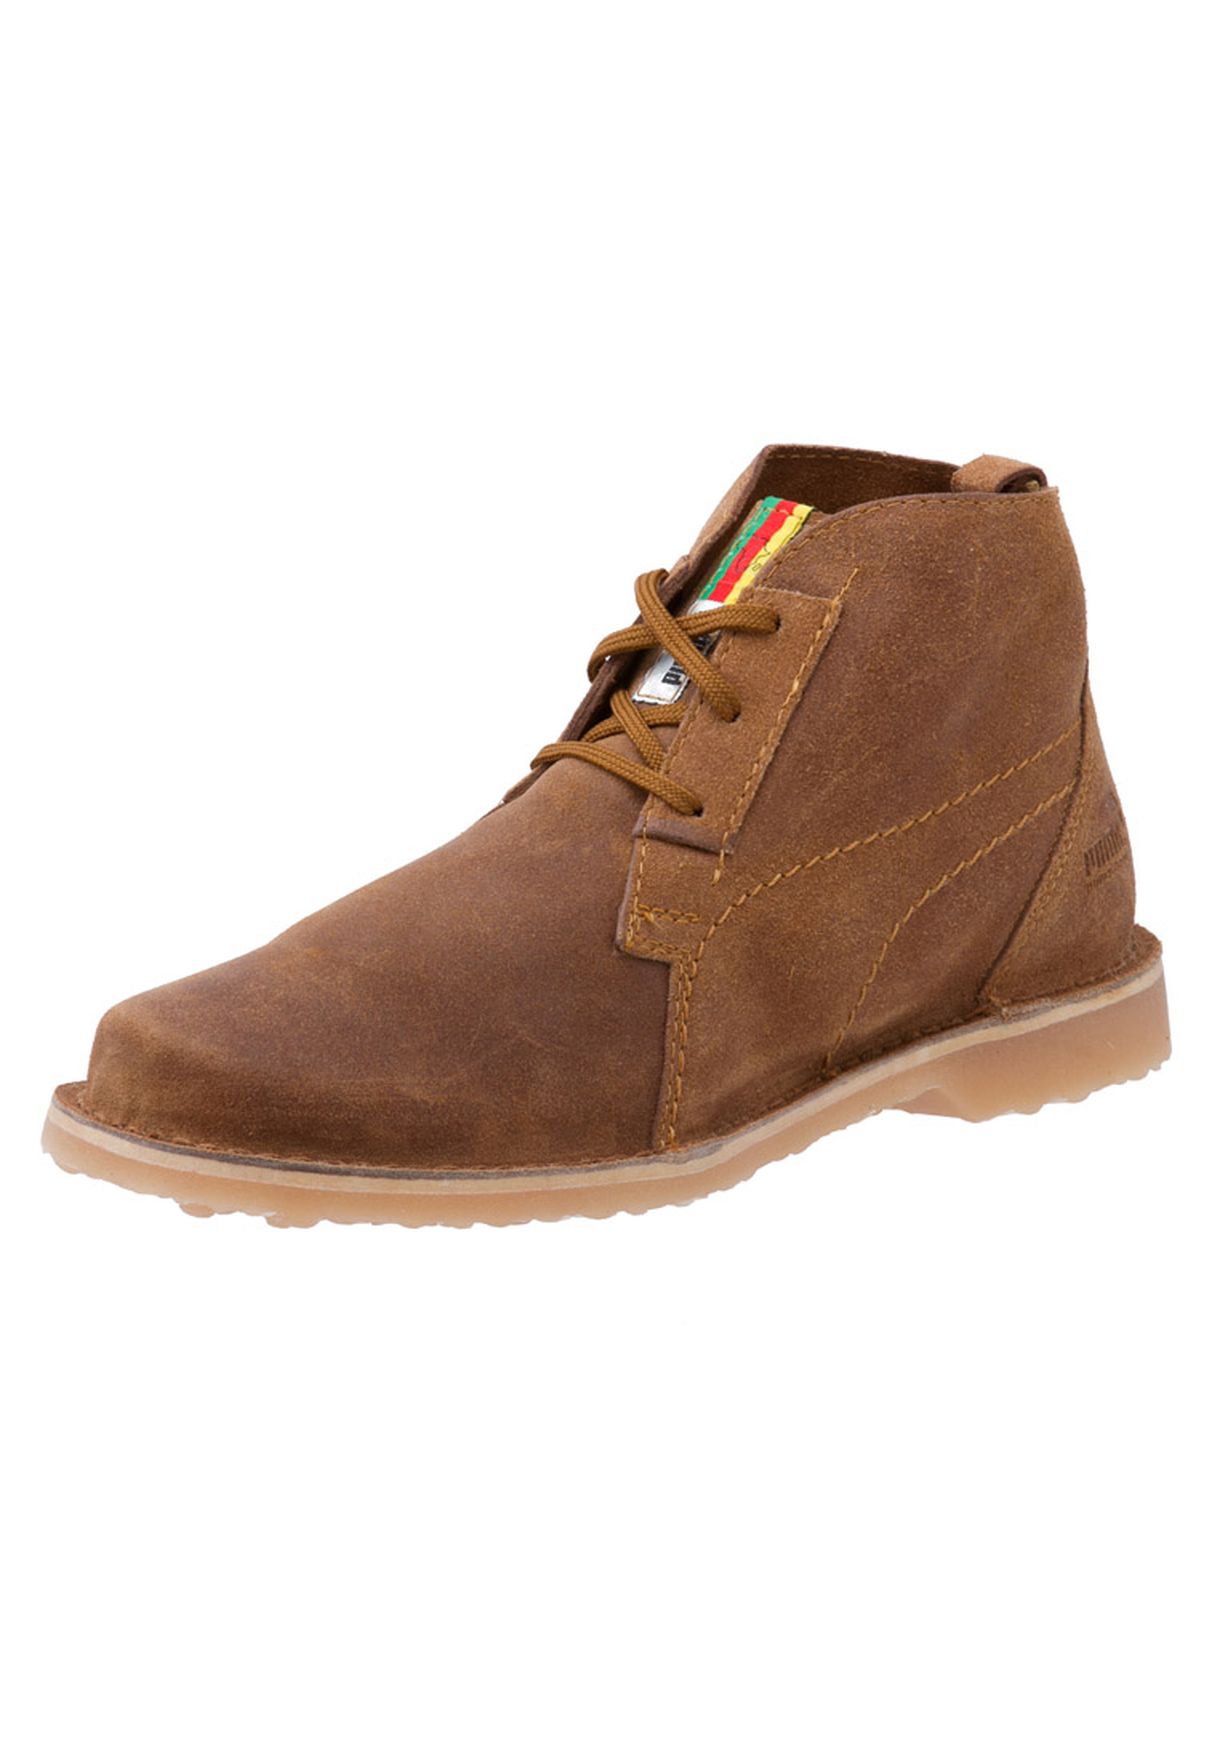 Buy PUMA Terrae Mid Africa Boots for 